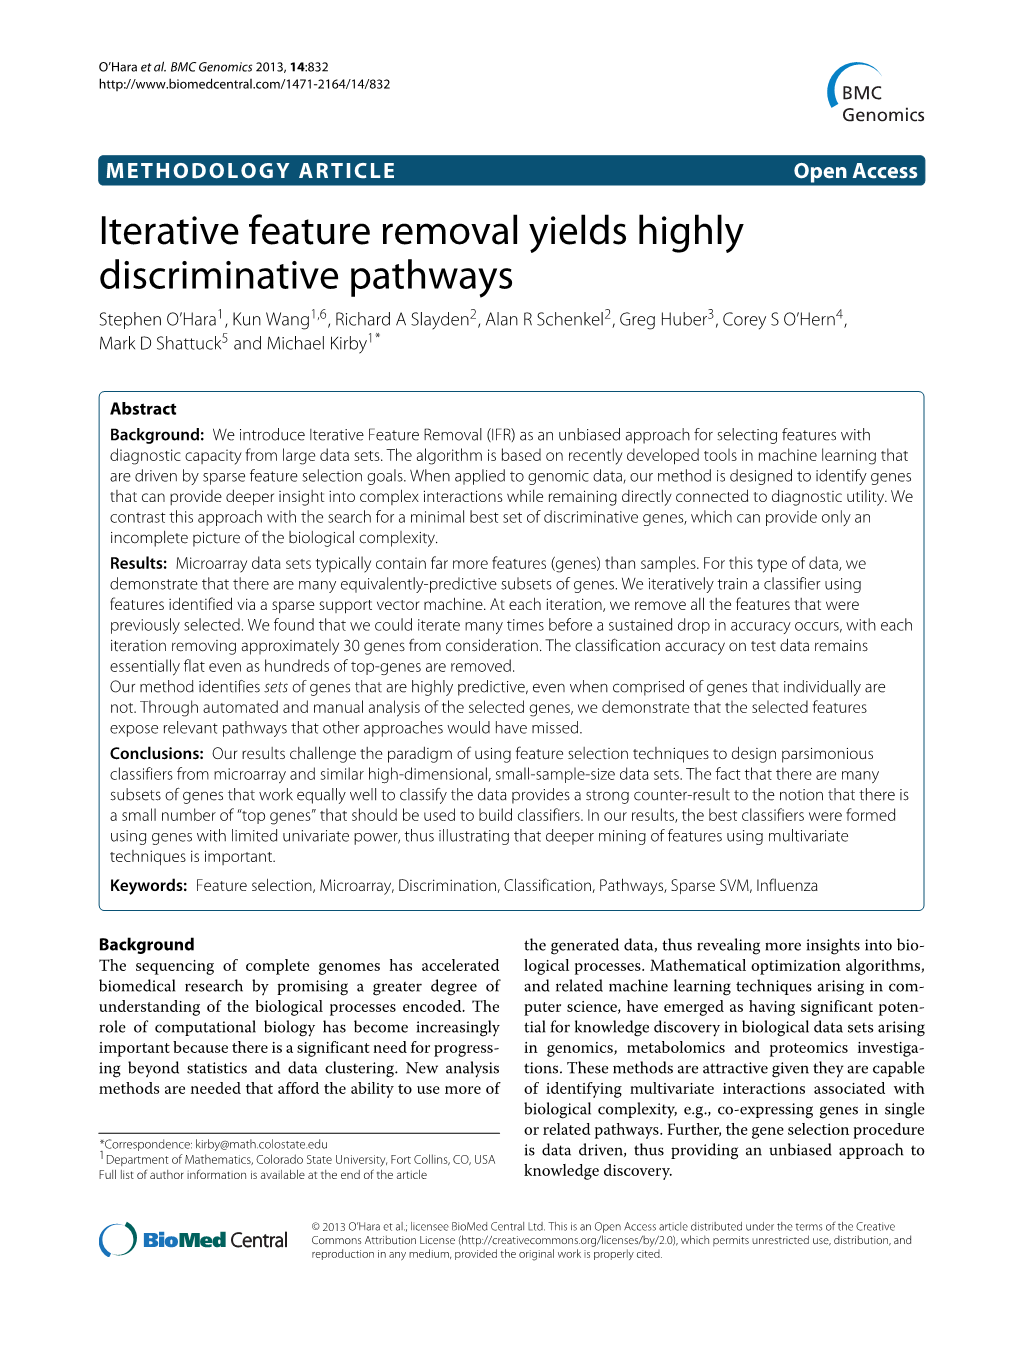 Iterative Feature Removal Yields Highly Discriminative Pathways